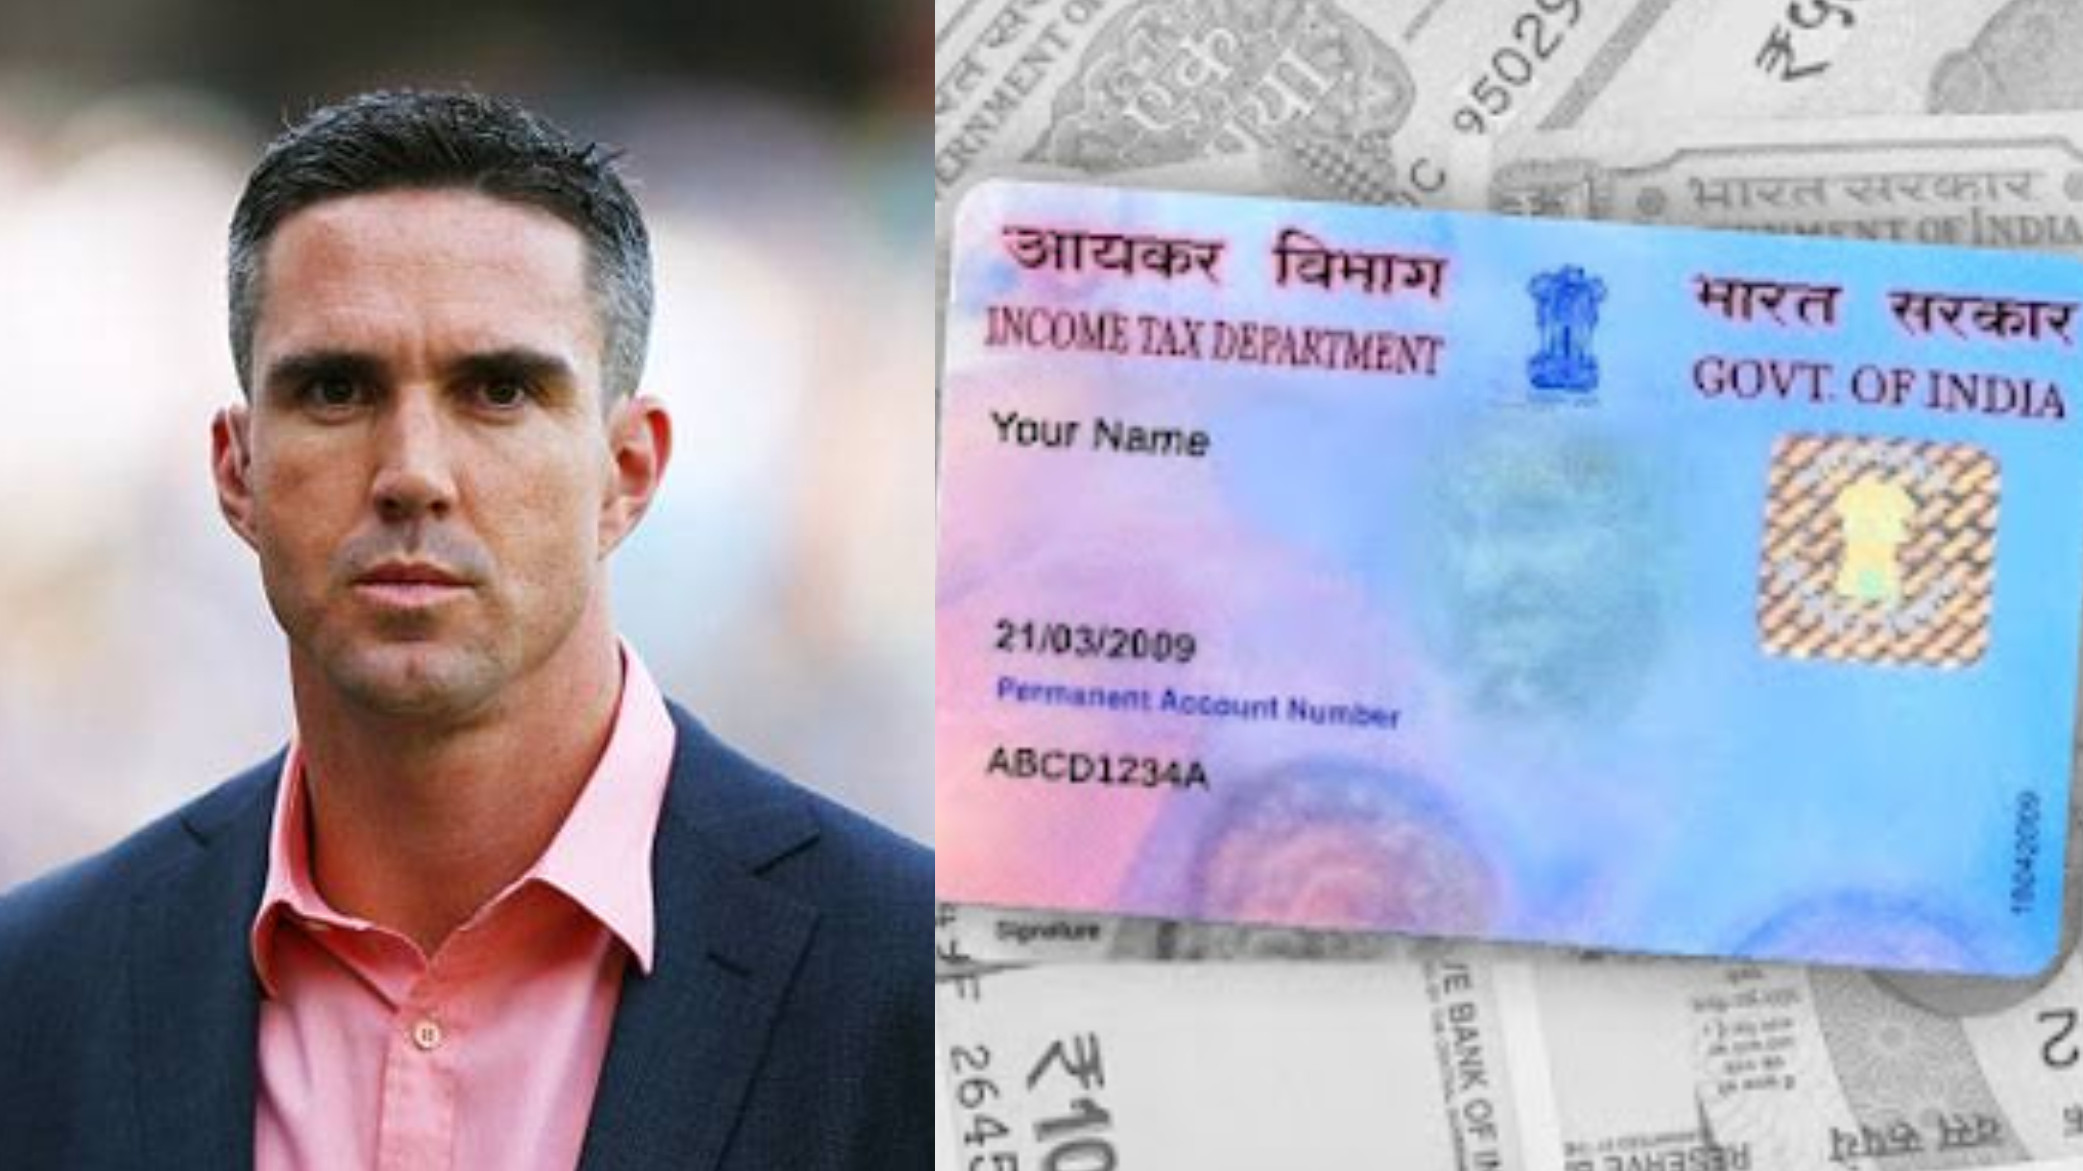 Kevin Pietersen loses his PAN card, asks for help; Income Tax department respond quickly